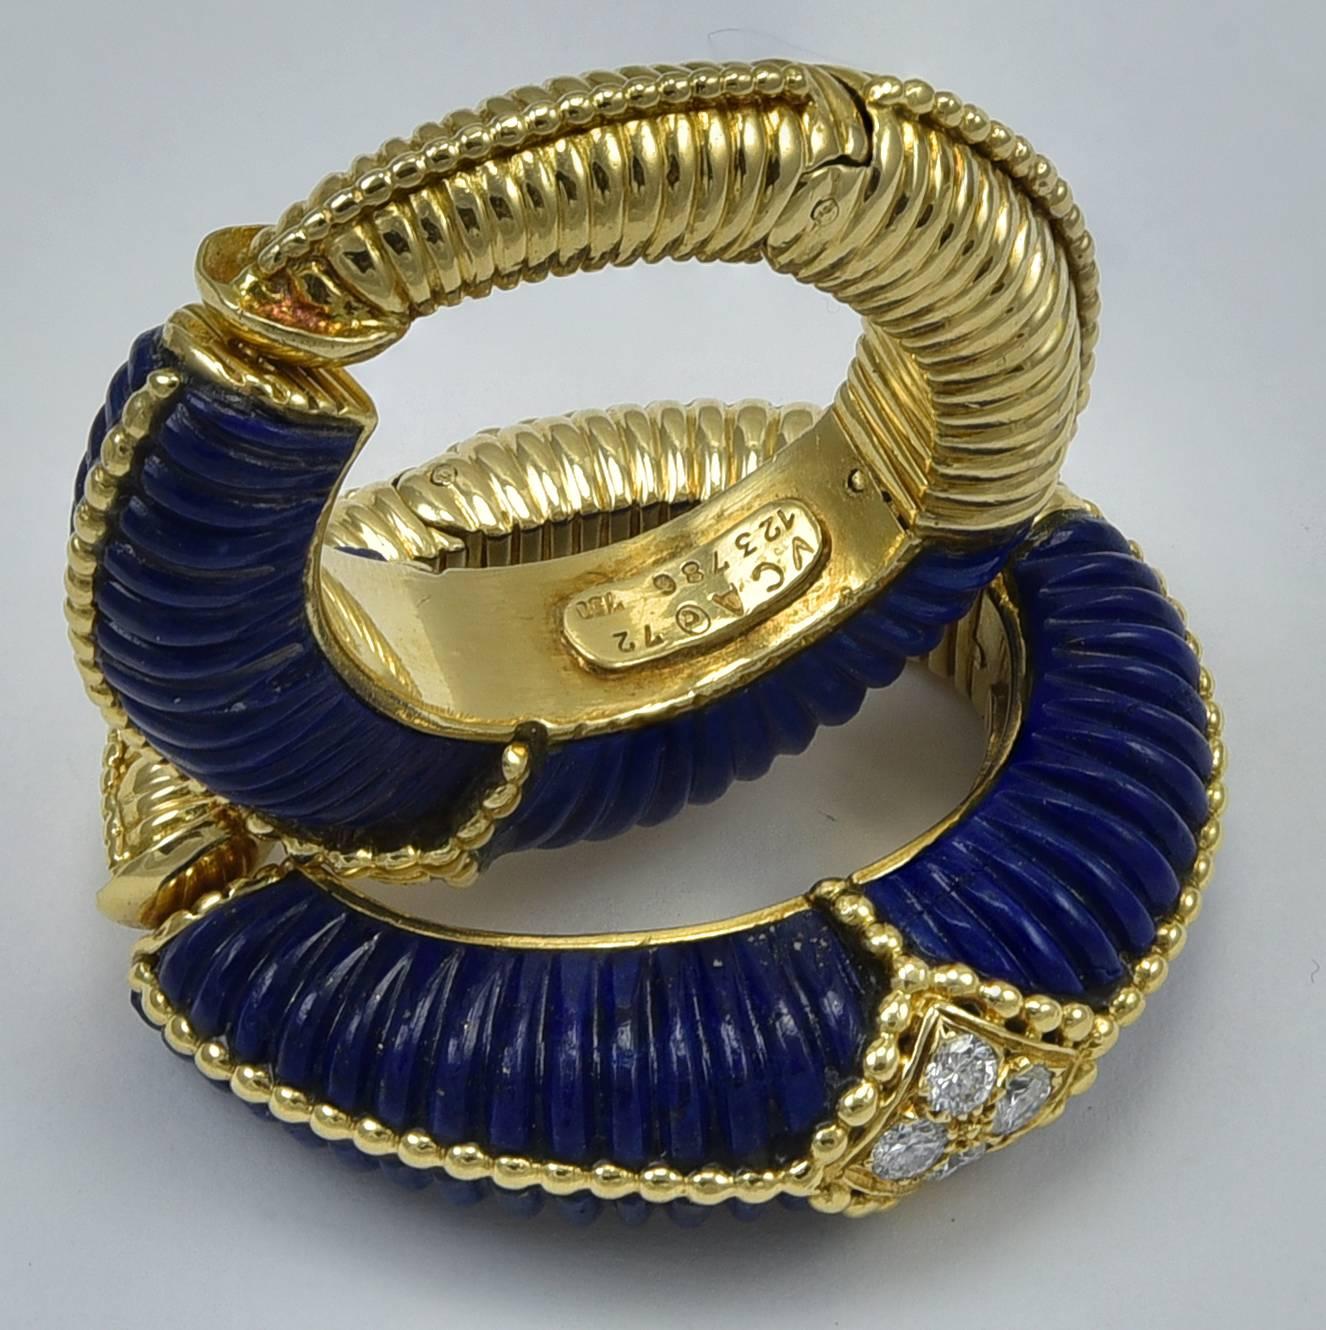 Large and dramatic carved lapis hoop earrings. Made, signed and numbered by Van Cleef & Arpels. 18K yellow gold with ribbed pattern that matches the carving on the lapis. Each earring is set with four round brilliant full-cut diamonds. 1-1/2